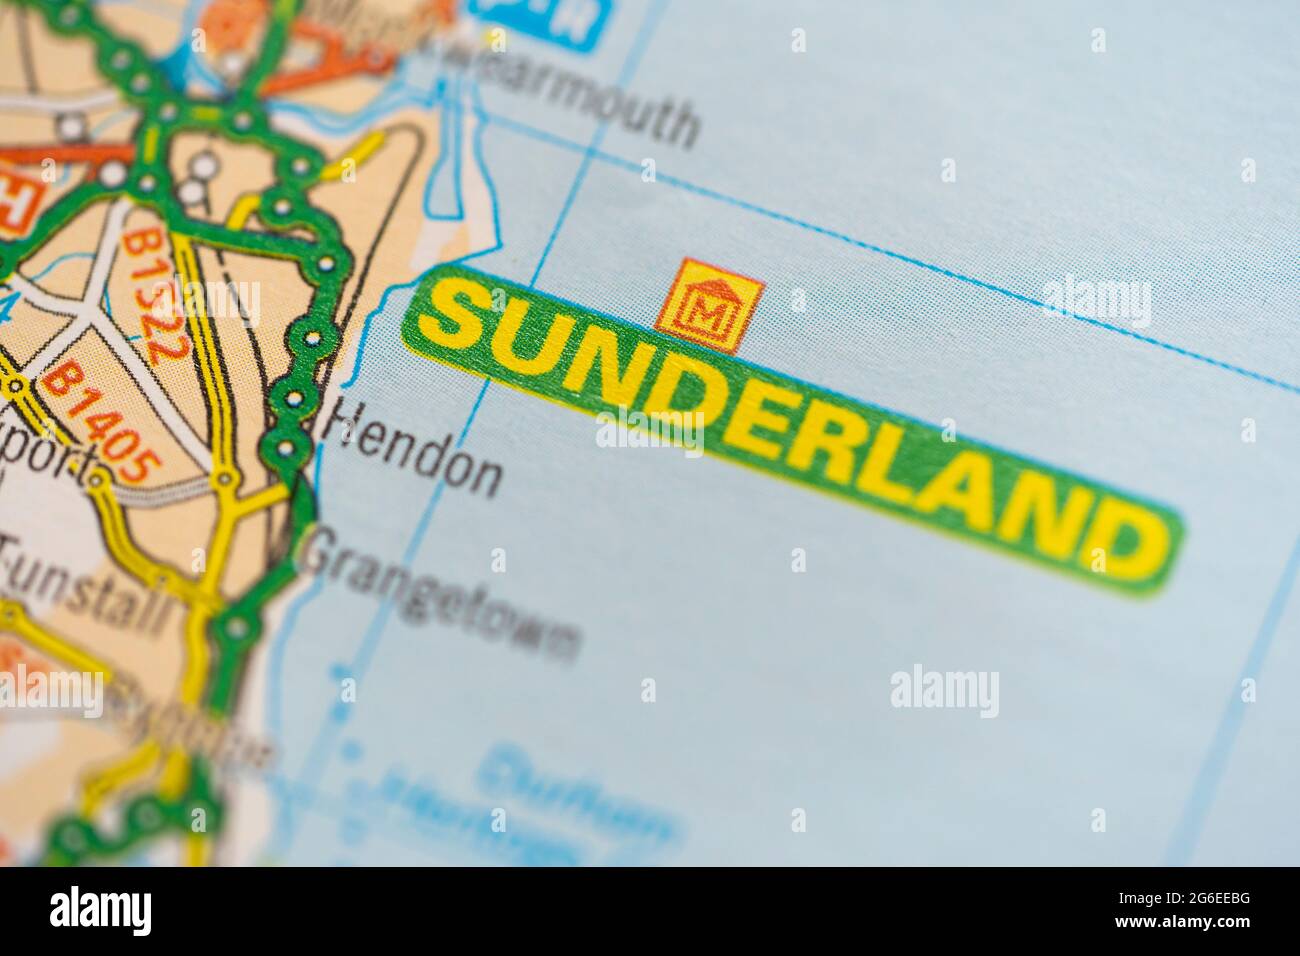 A macro closeup of a page in a printed road map atlas showing the coastal city of Sunderland in England Stock Photo